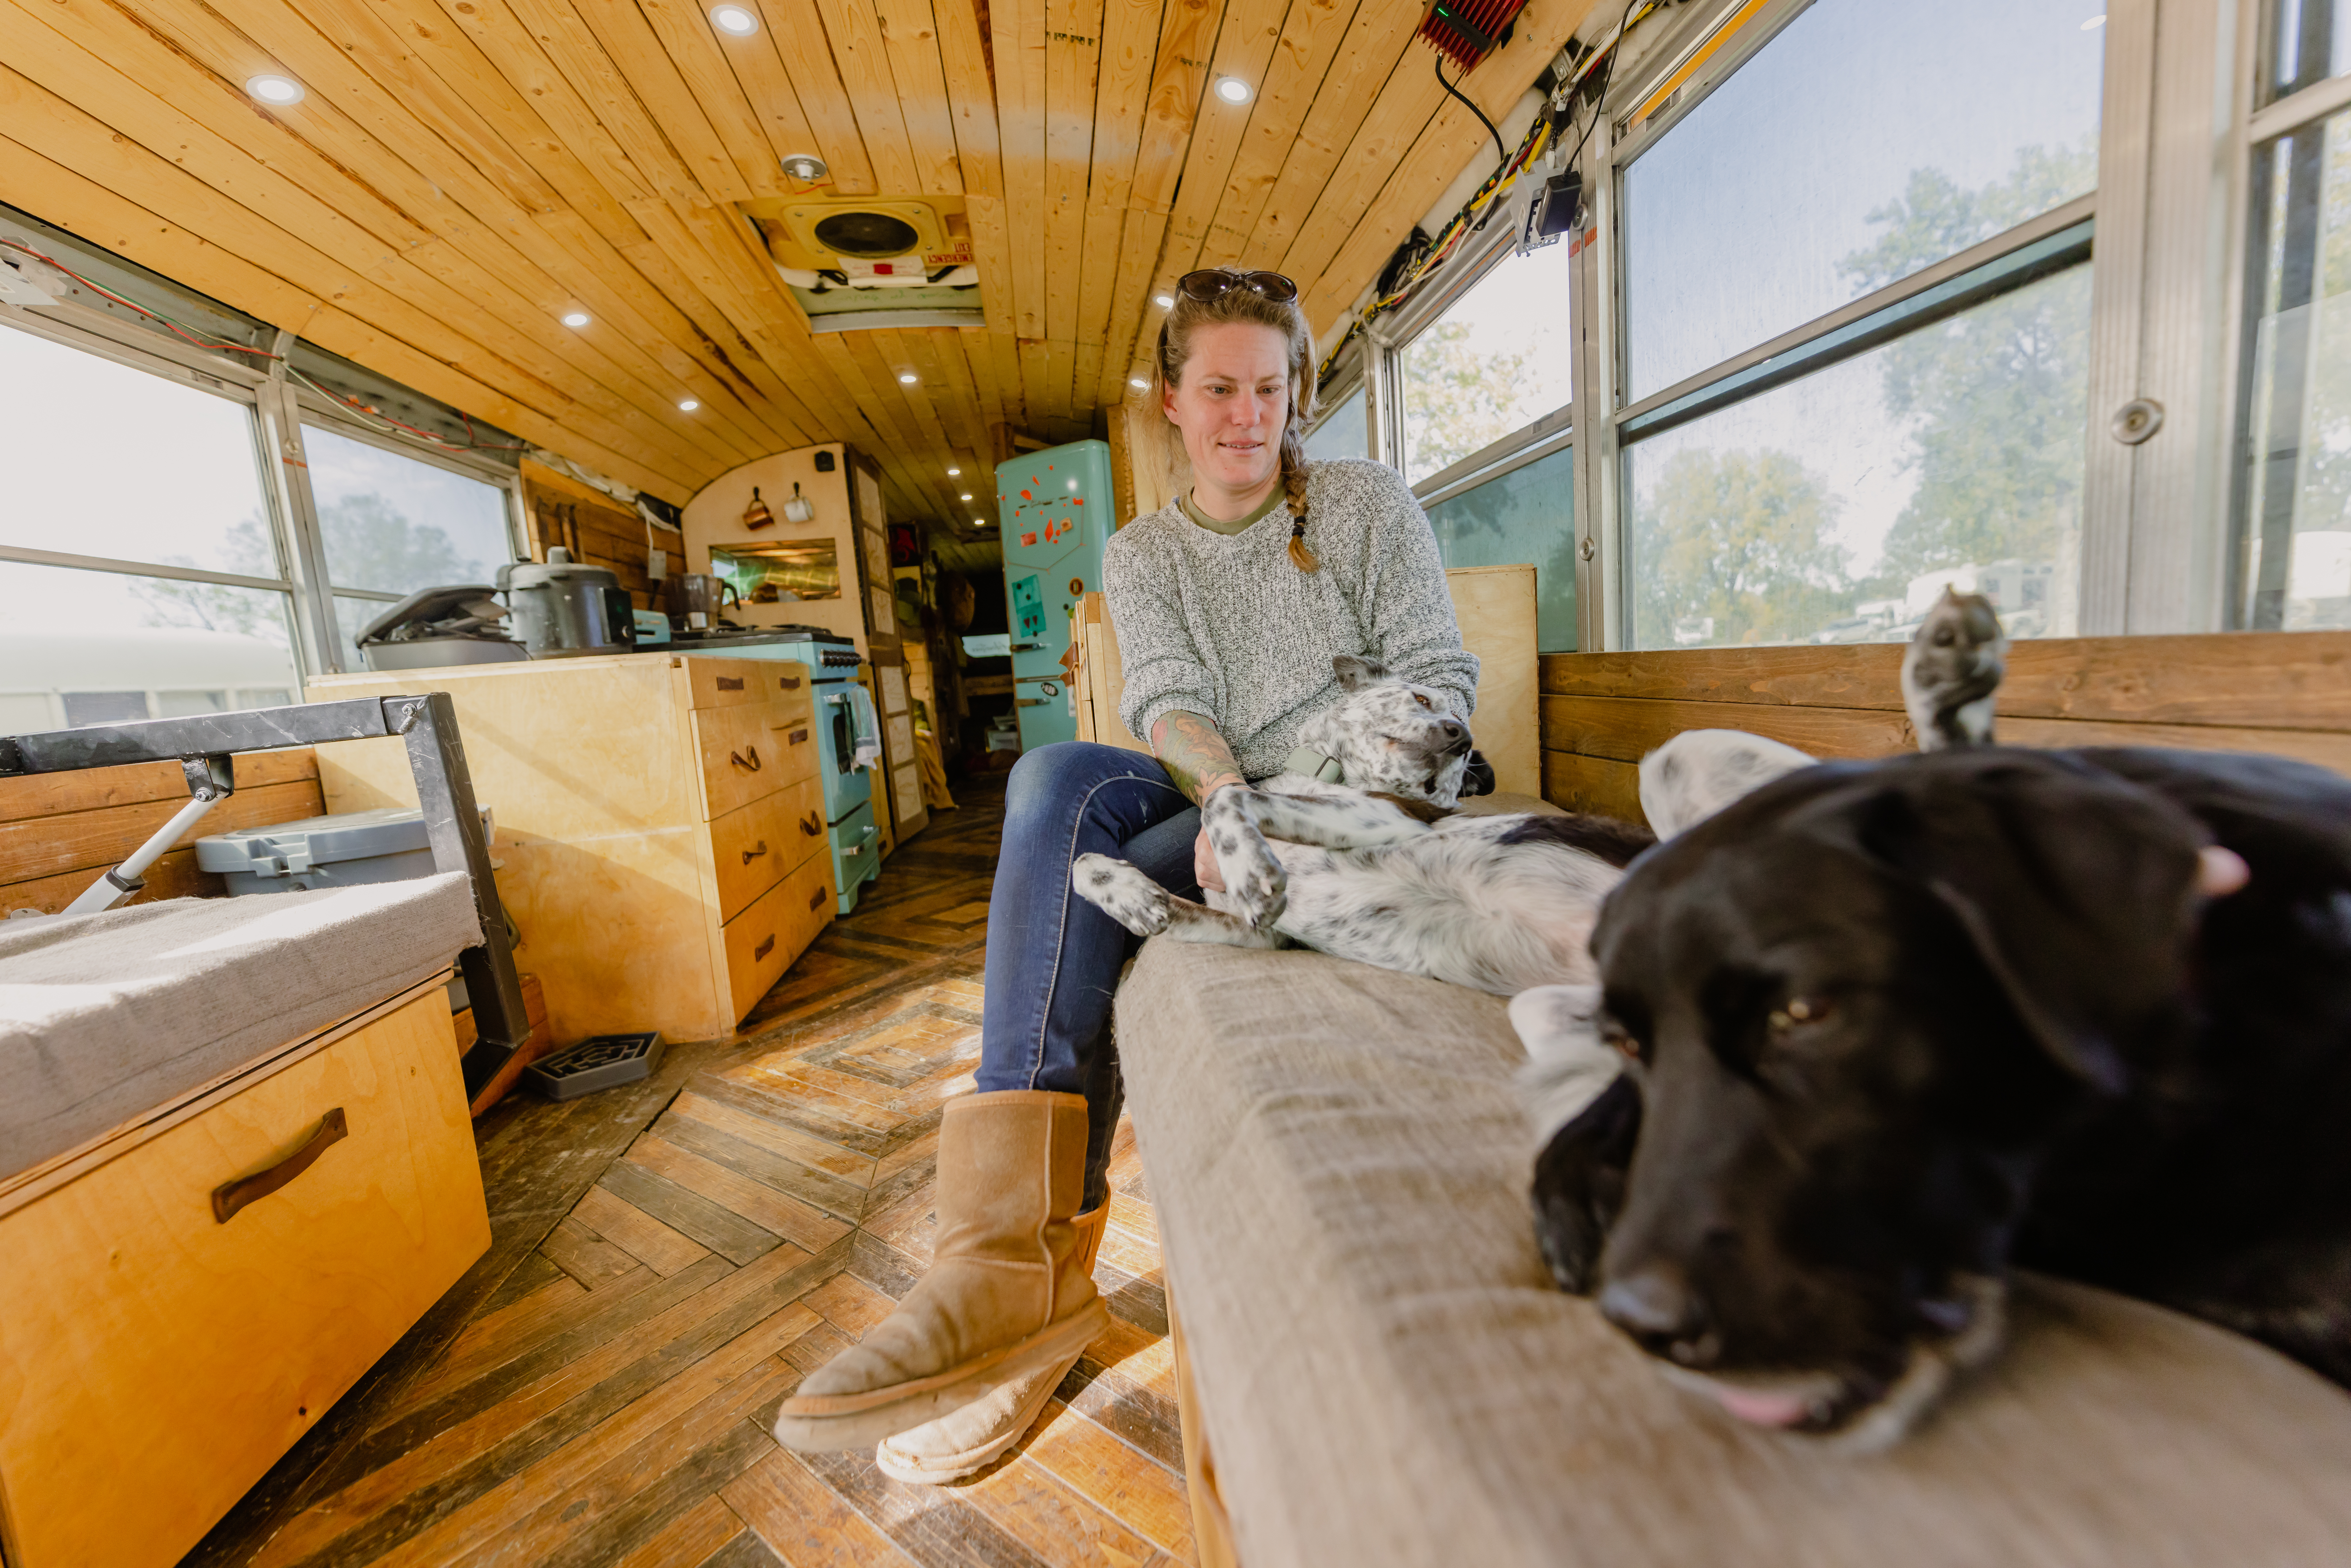 Jessica Rambo playing with her dogs inside of her converted skoolie